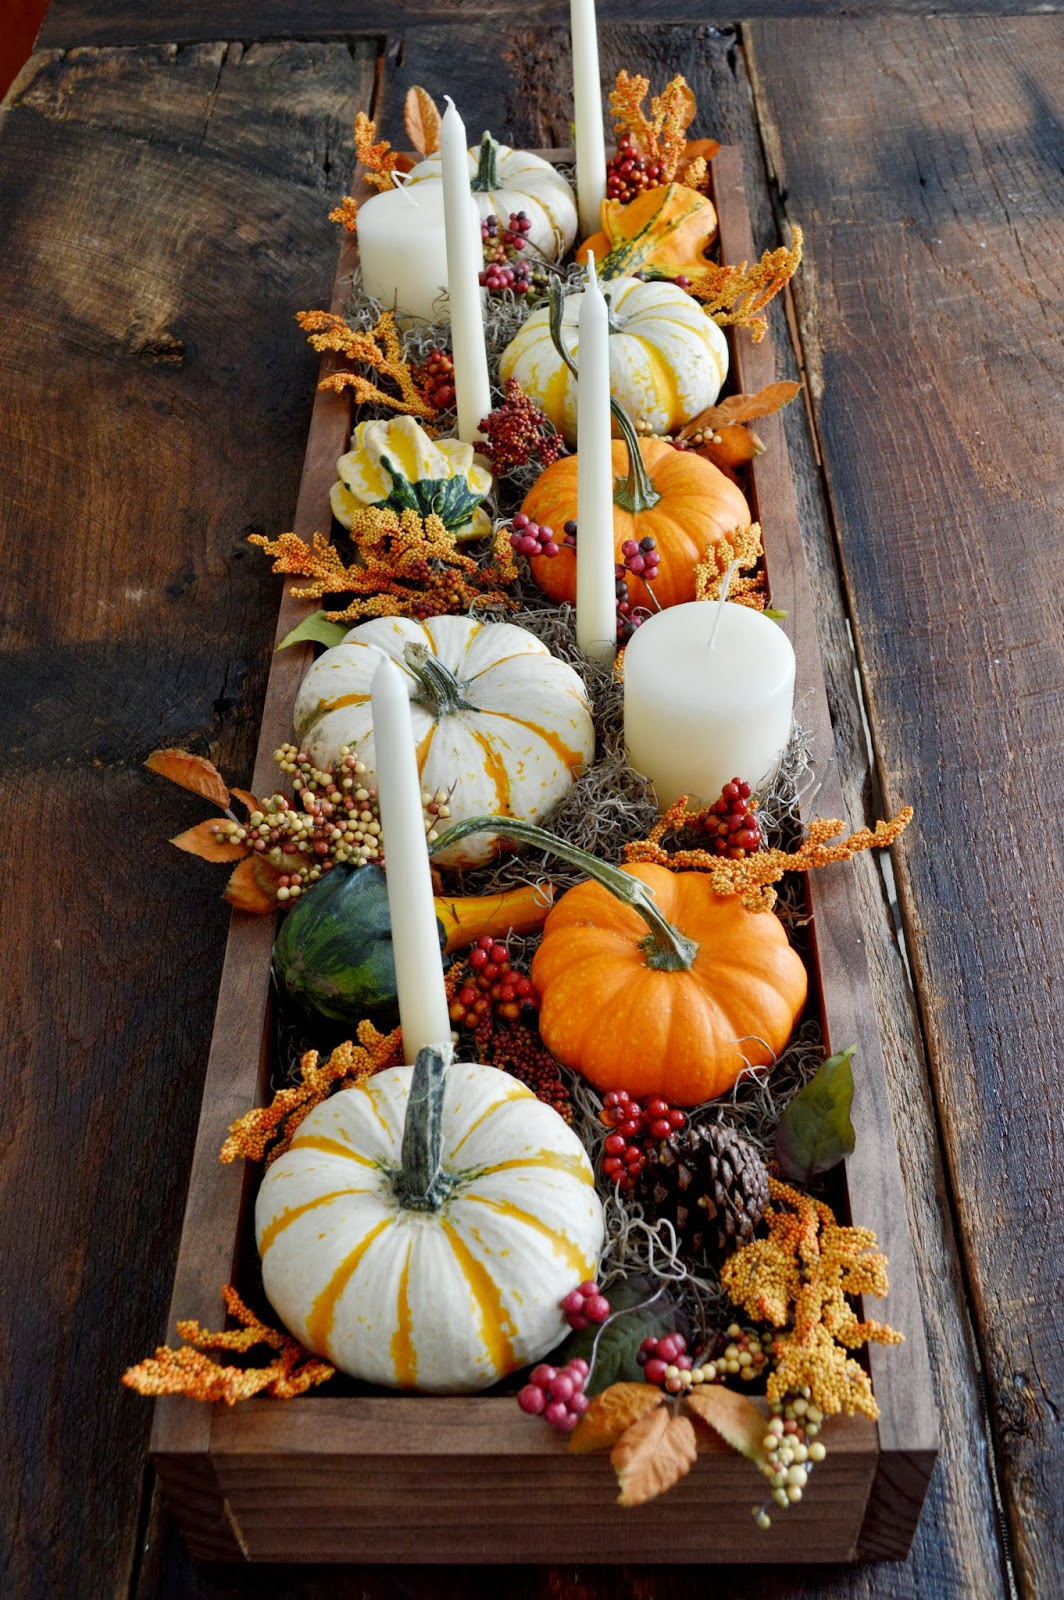 Fall table ideas: If you’re looking for more structure in your table runner, using a simple wooden box is the perfect way to display your fall decor. Fill it with moss, greenery, candles, pumpkins, pinecones and whatever other hodgepodge of autumn items you have on hand.